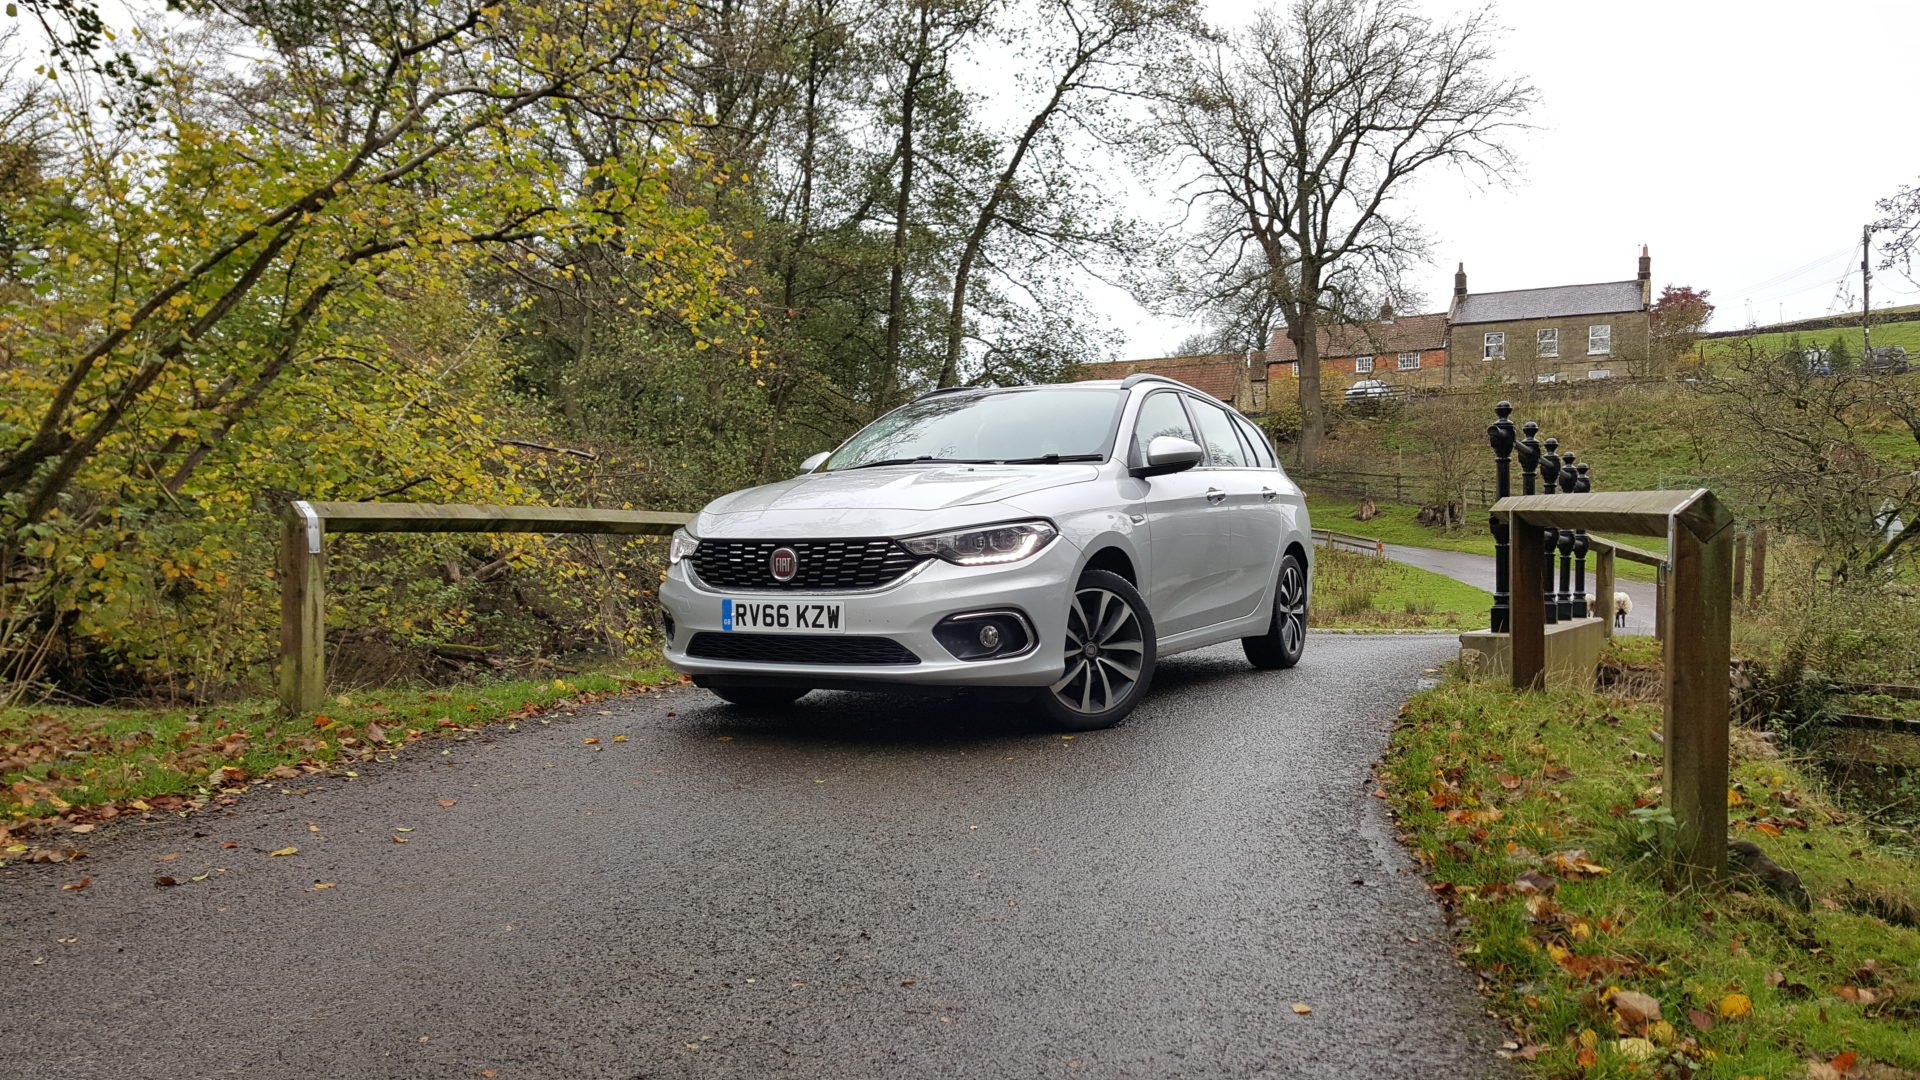 FIAT Tipo SW Review: A Real Estate – GTPlanet